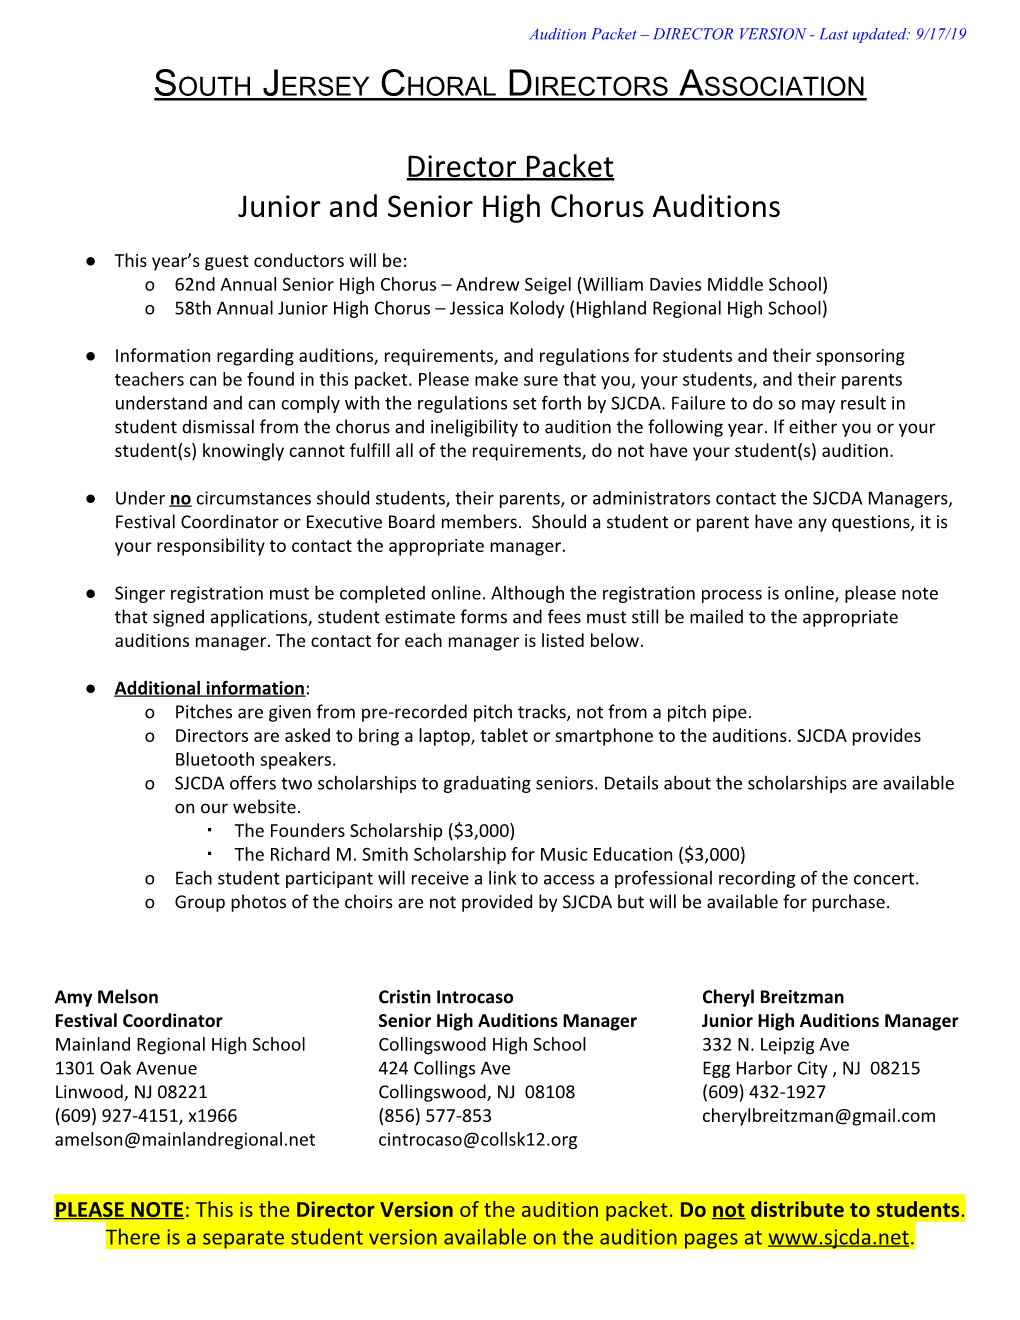 Director Packet Junior and Senior High Chorus Auditions